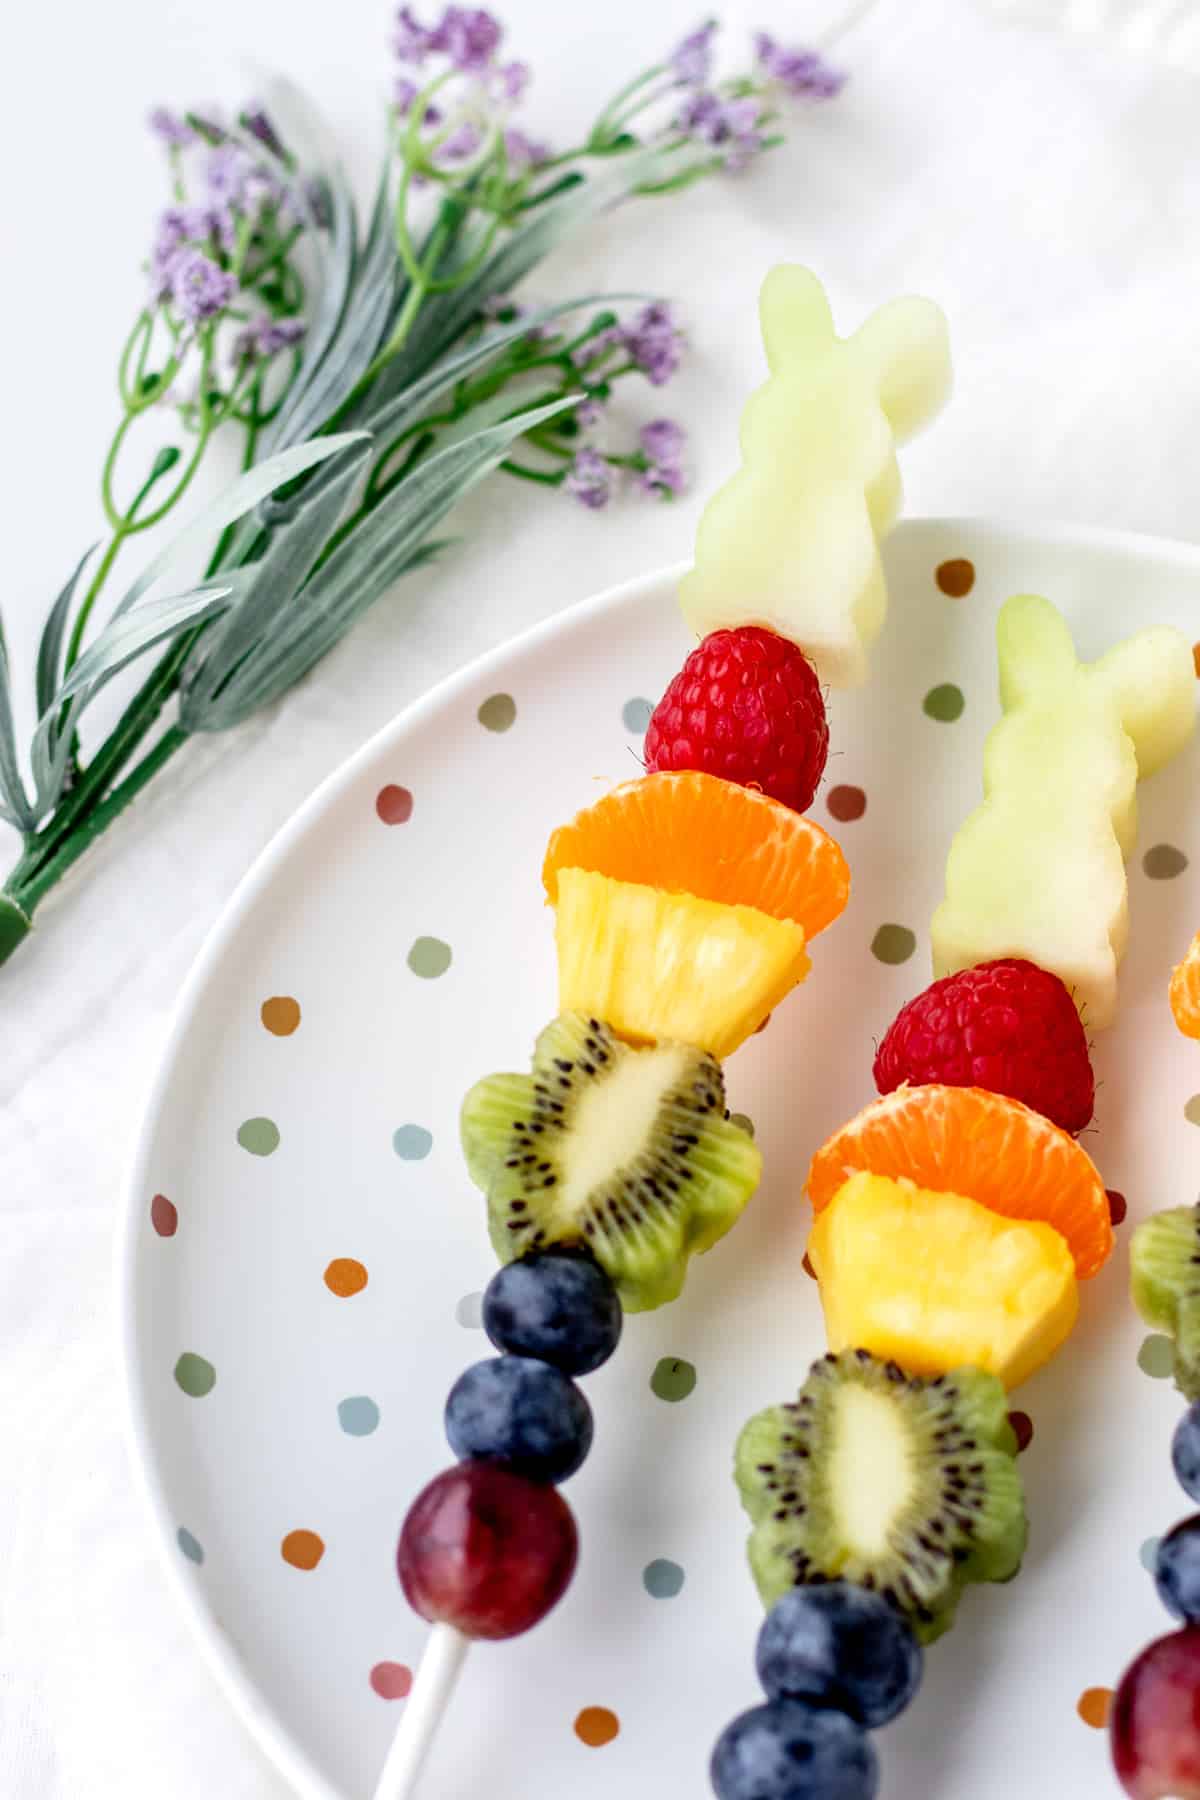 A close-up of Easter fruit kabobs on a polka-dotted plate.